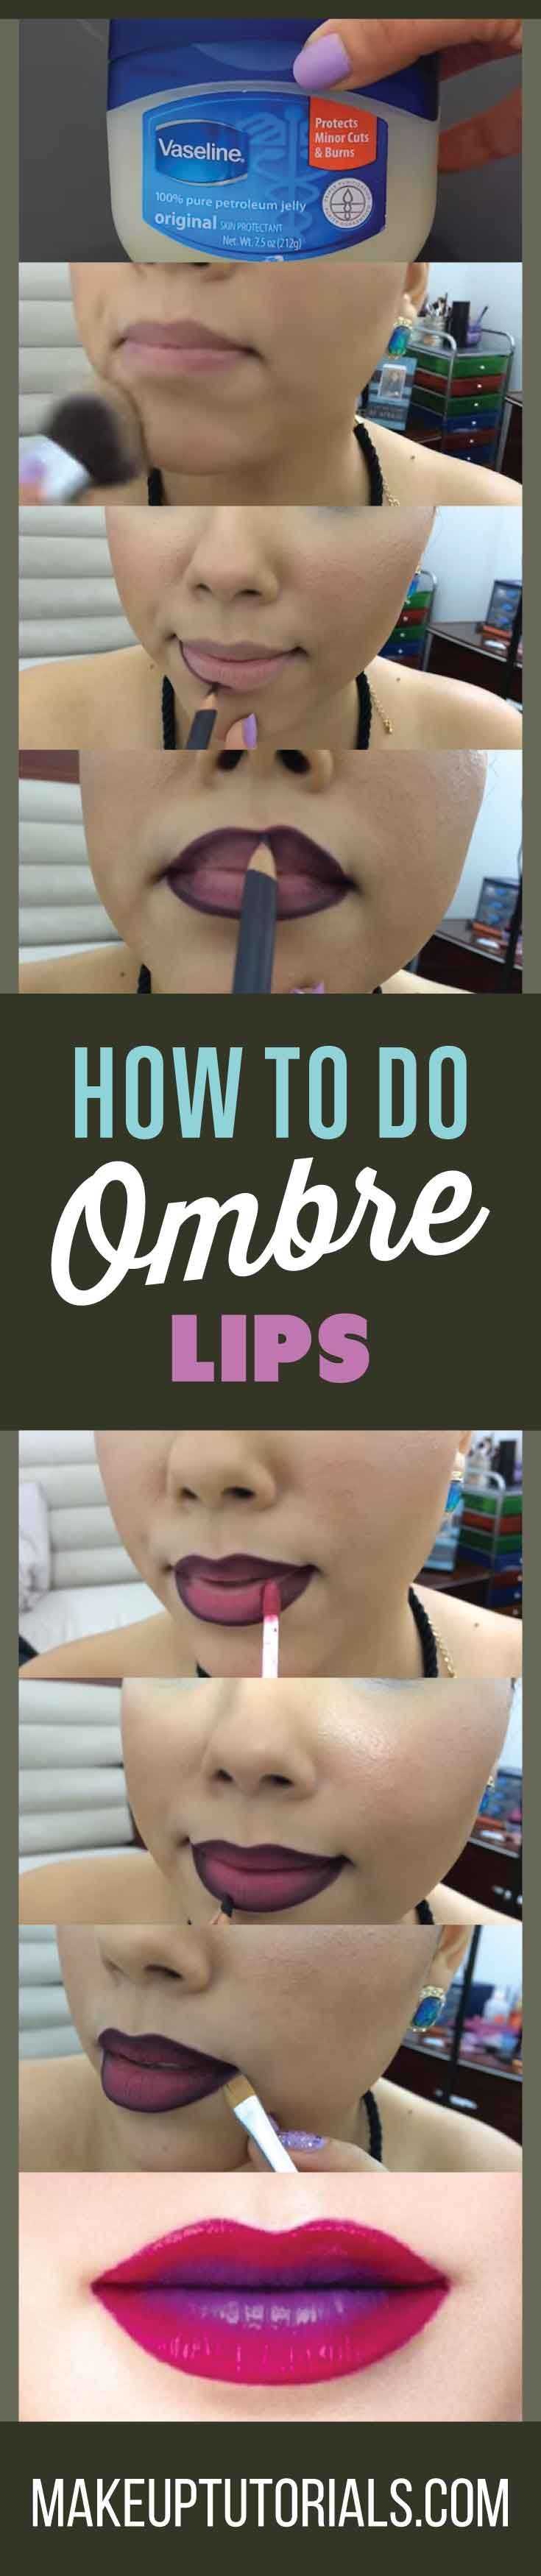 How To Do Ombre Lips